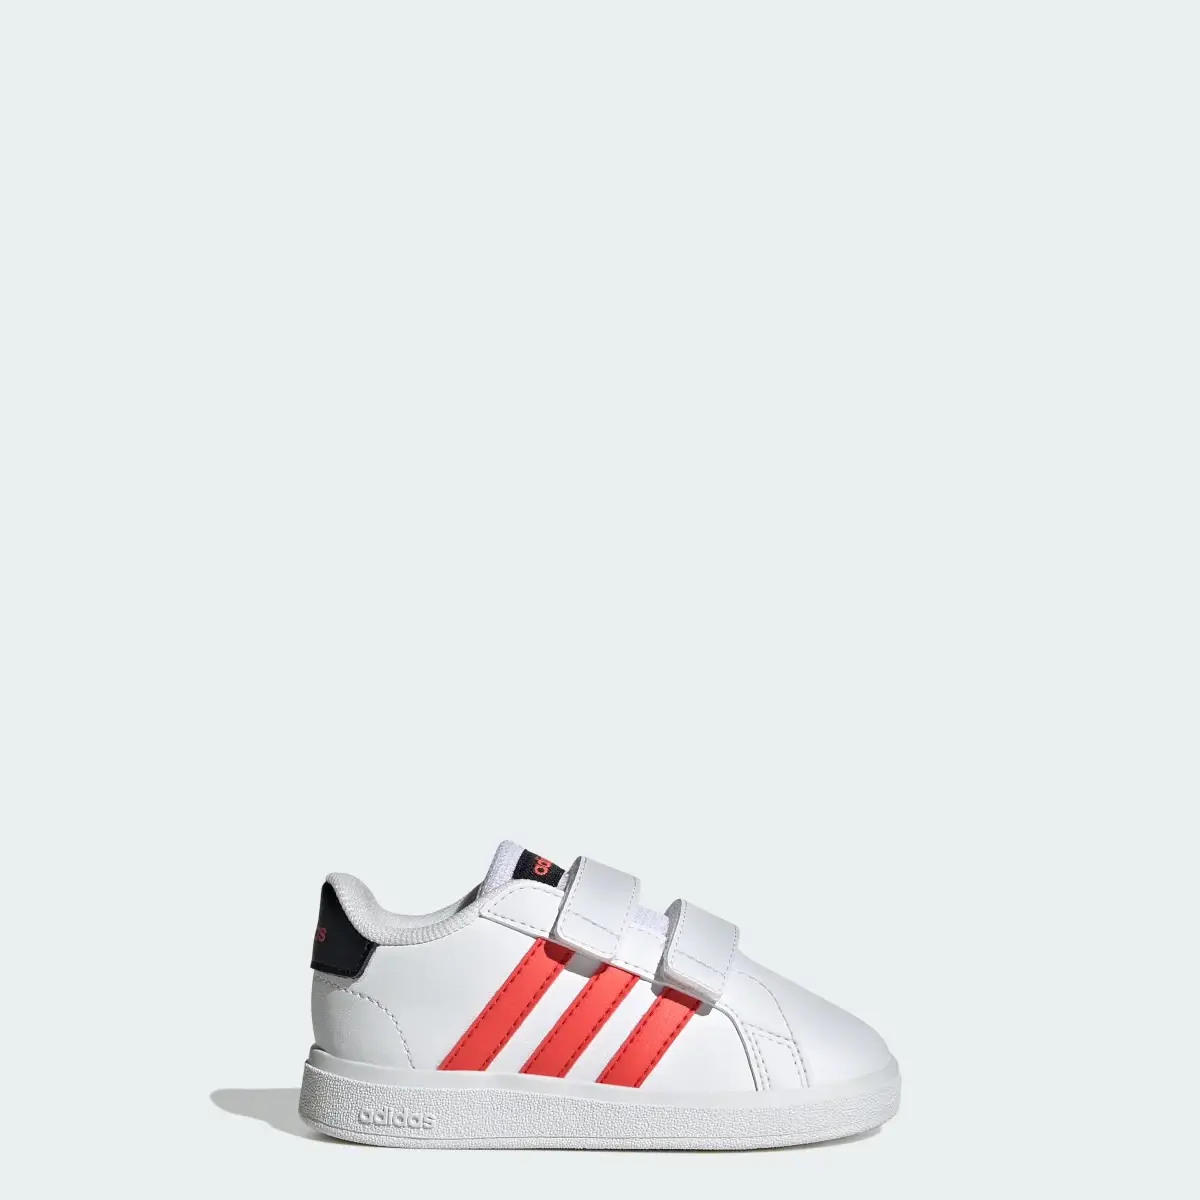 Adidas Grand Court Lifestyle Hook and Loop Shoes. 1